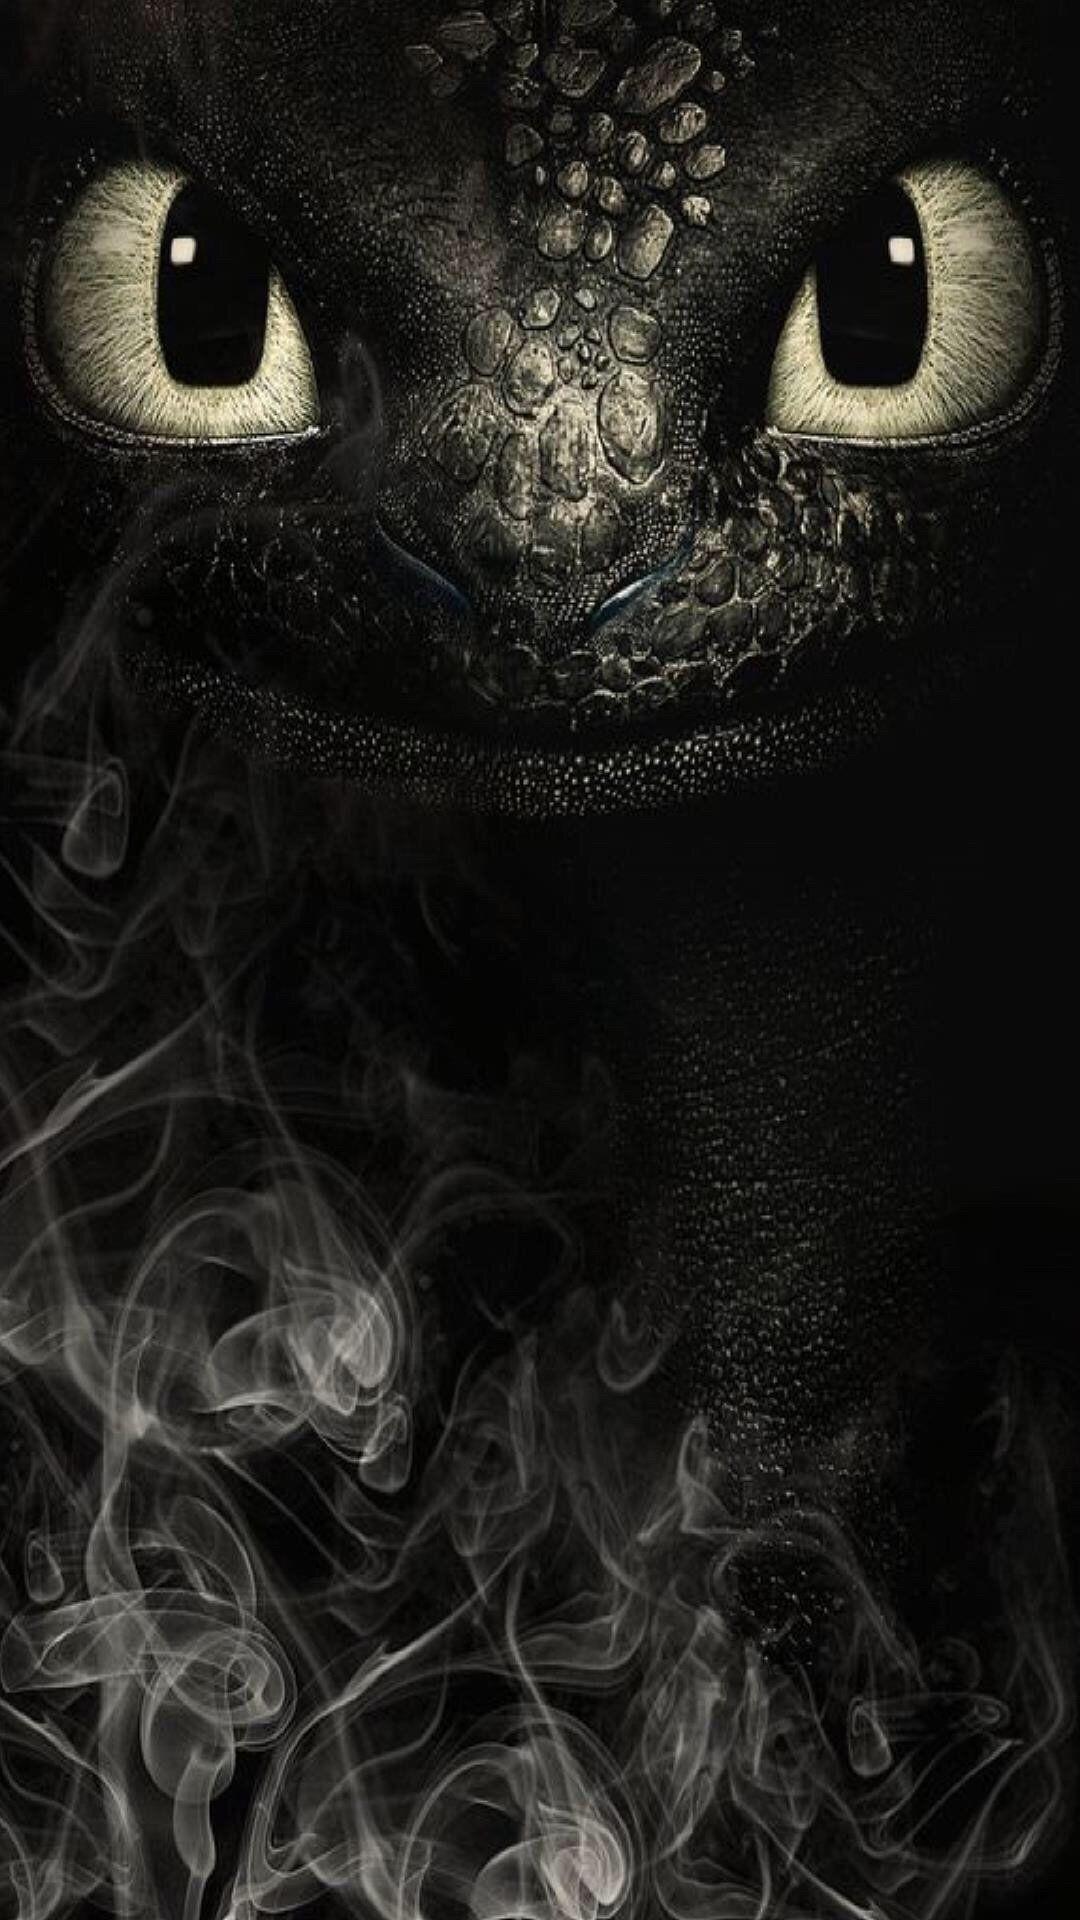 The iPhone XS Max Wallpaper Thread, iPad, iPod Forums at iMore.com. Dragon wallpaper iphone, Toothless wallpaper, How train your dragon